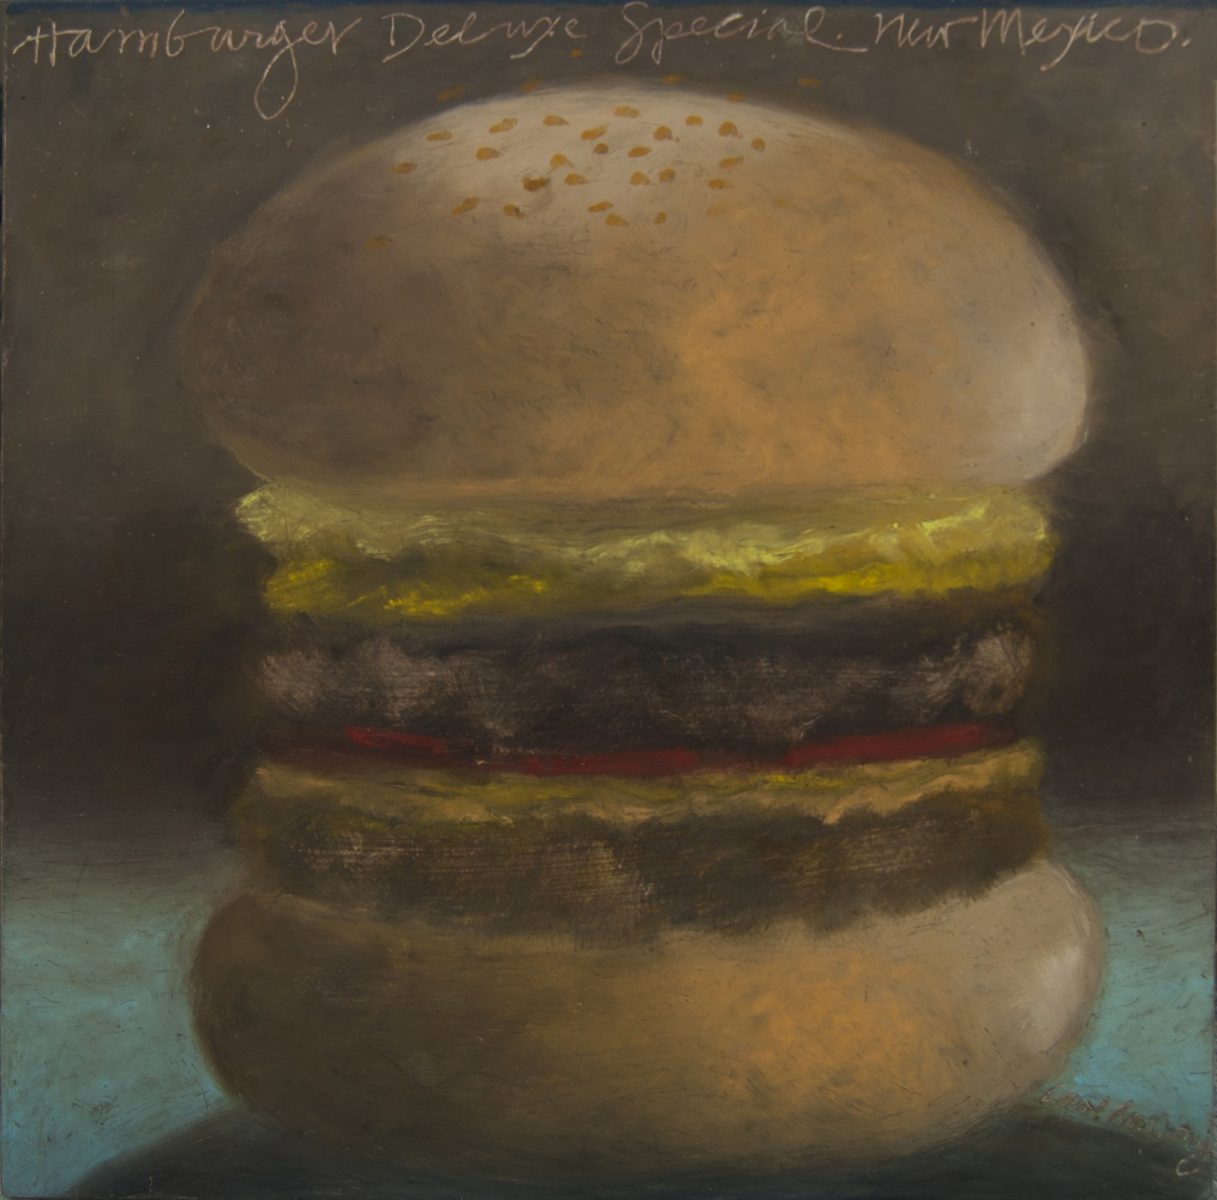 Oil pastel painting of cheeseburger by Carol Anthony